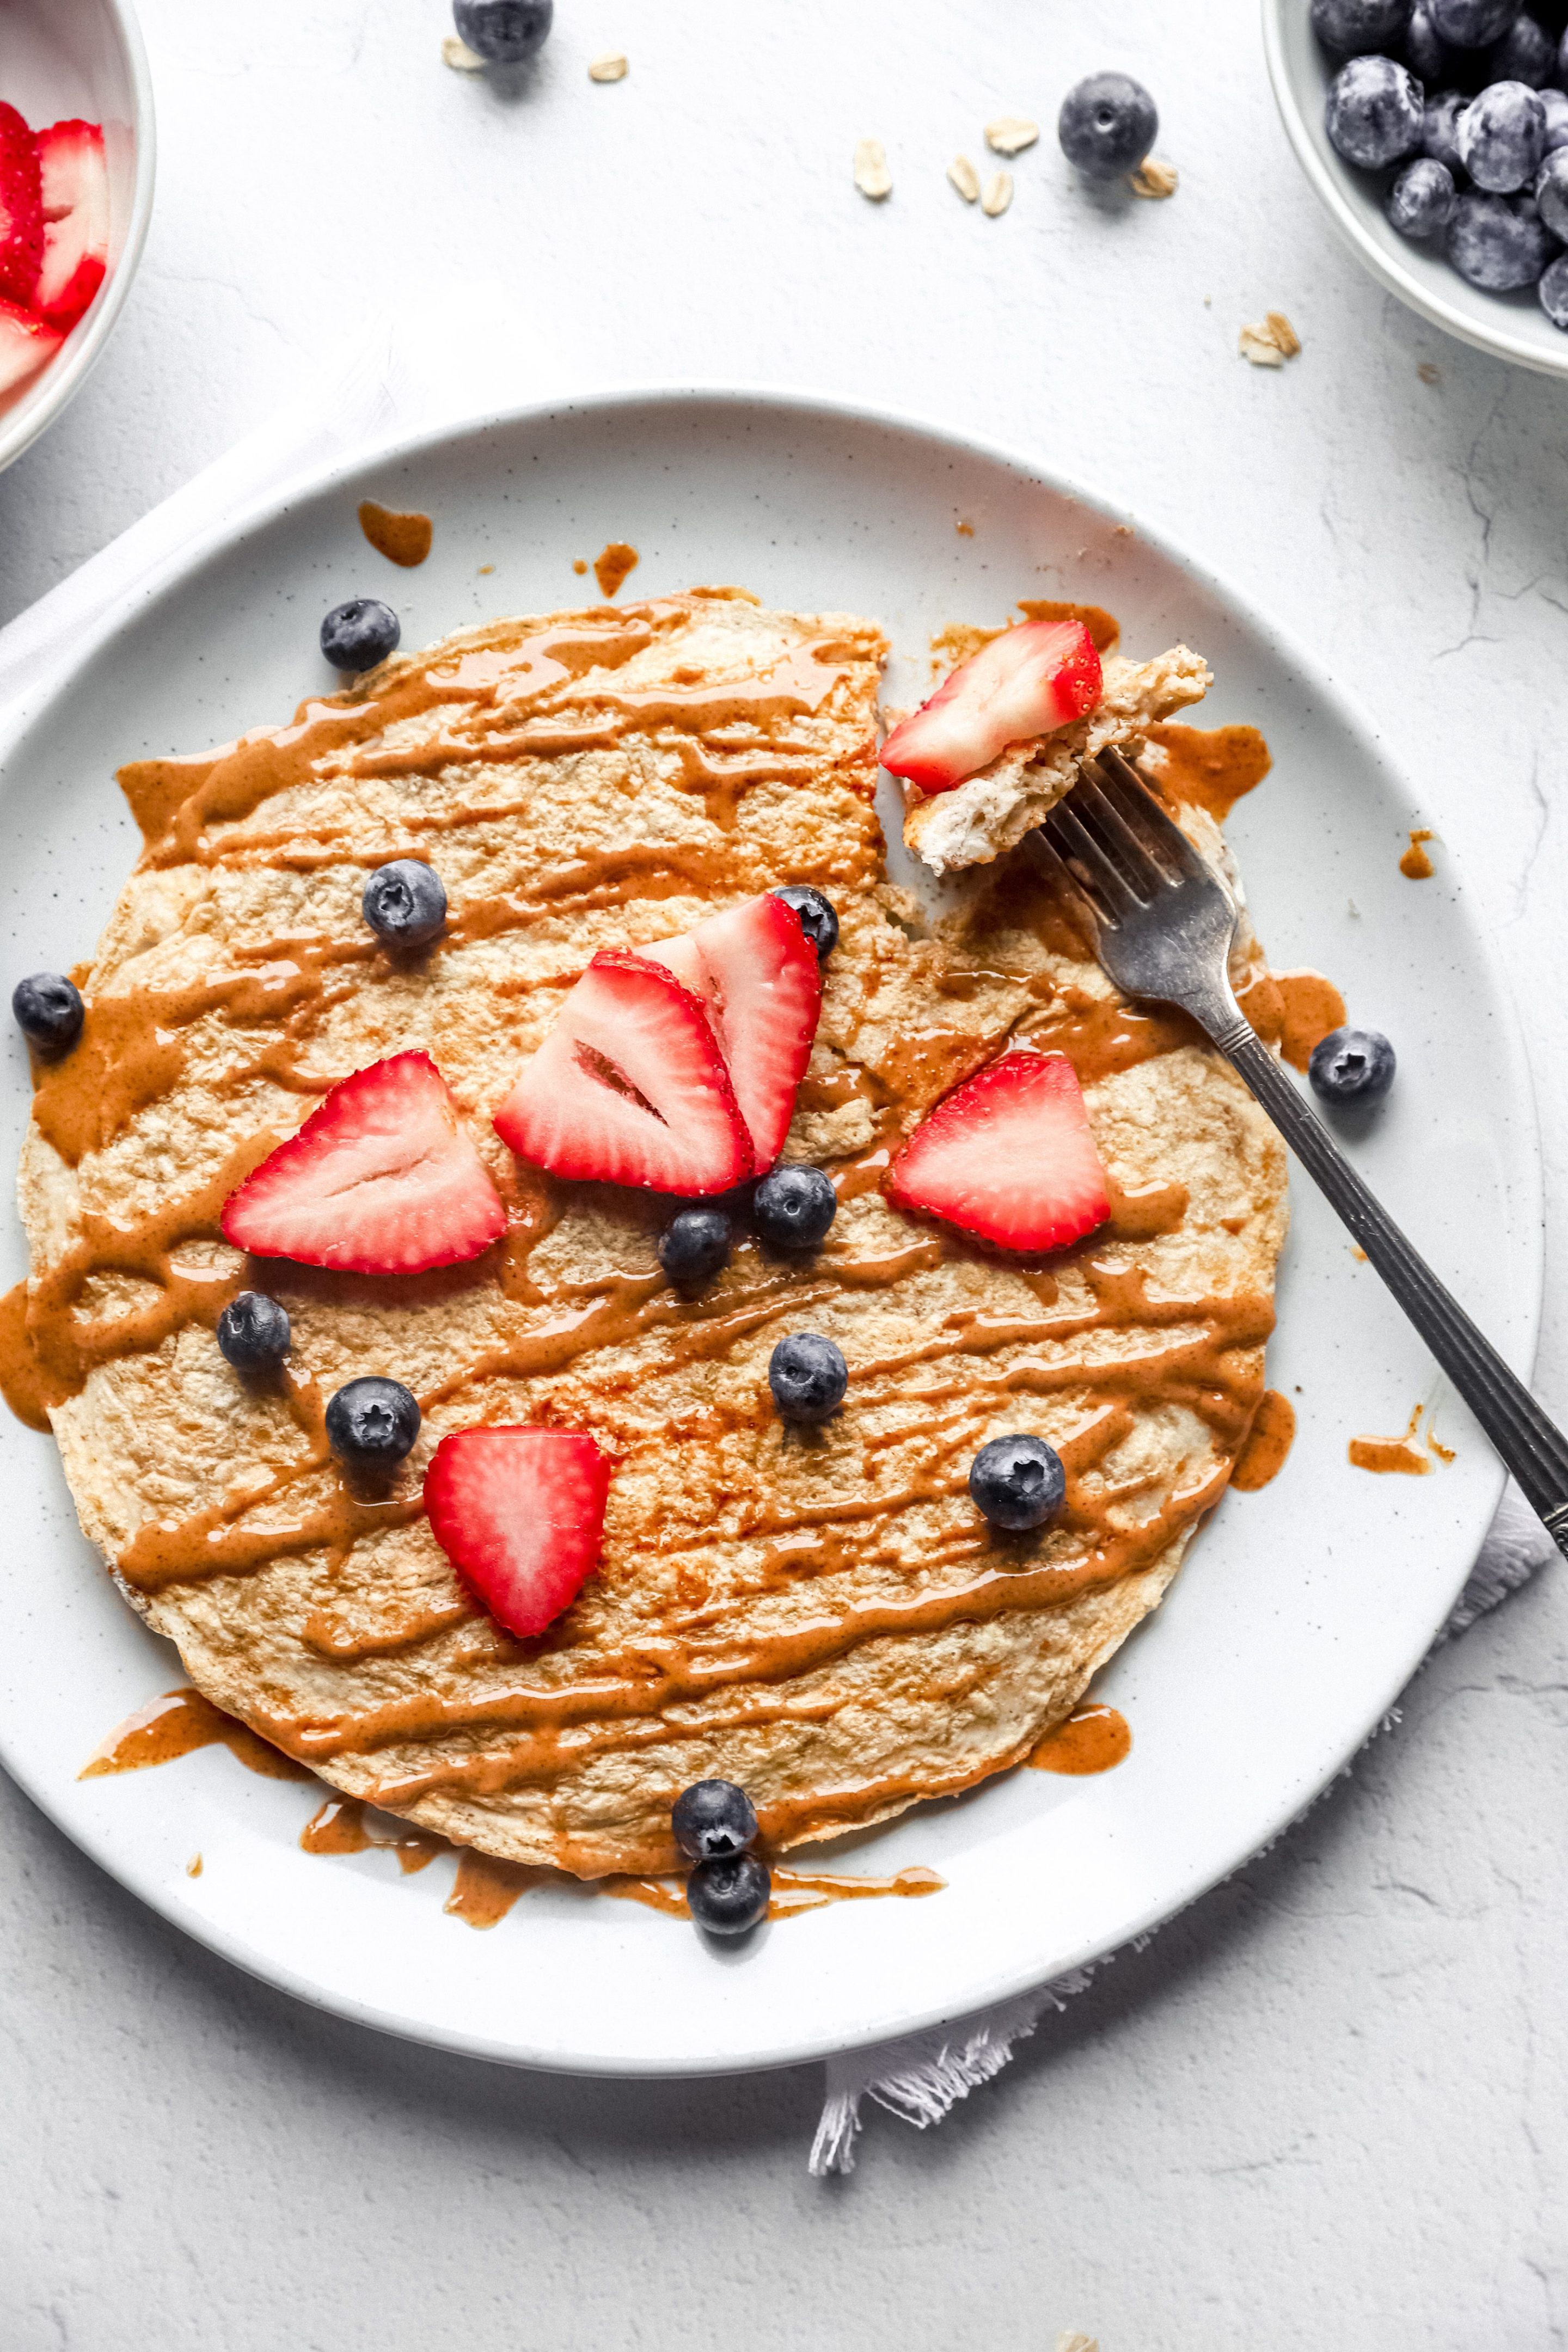 Quick and Healthy Protein Pancakes Recipe Under 100 Calories